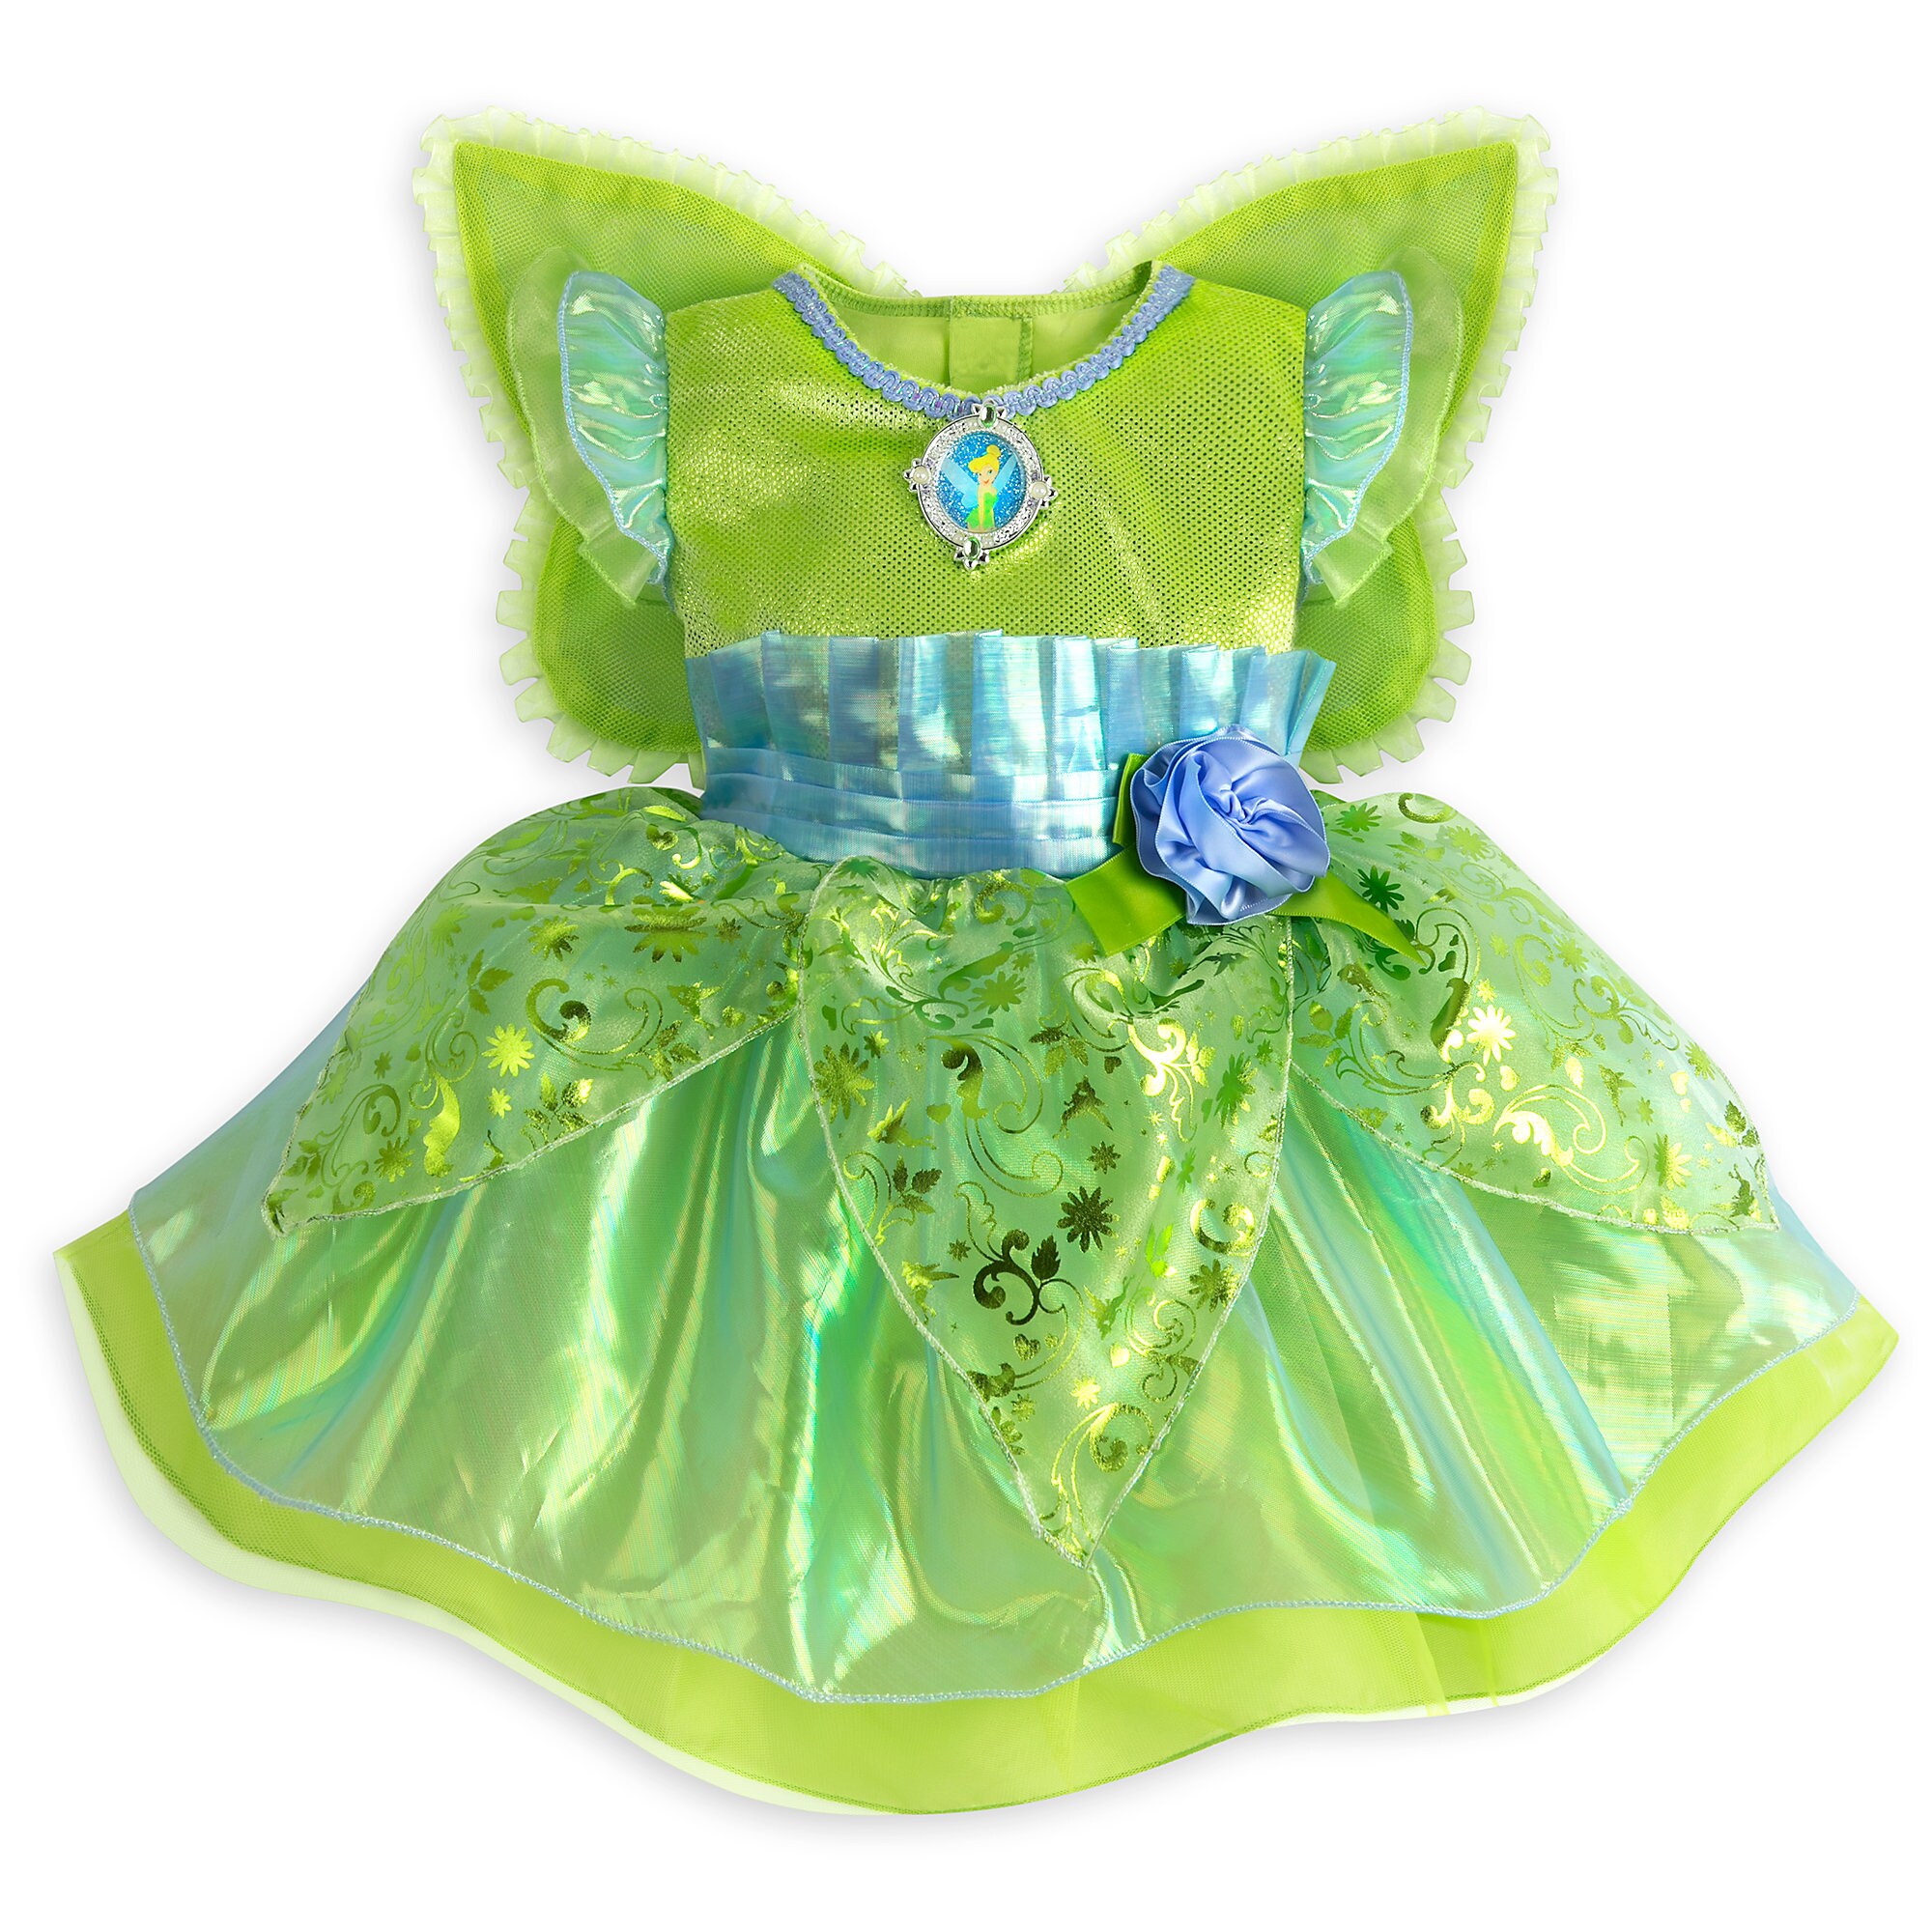 Tinker Bell Costume for Baby